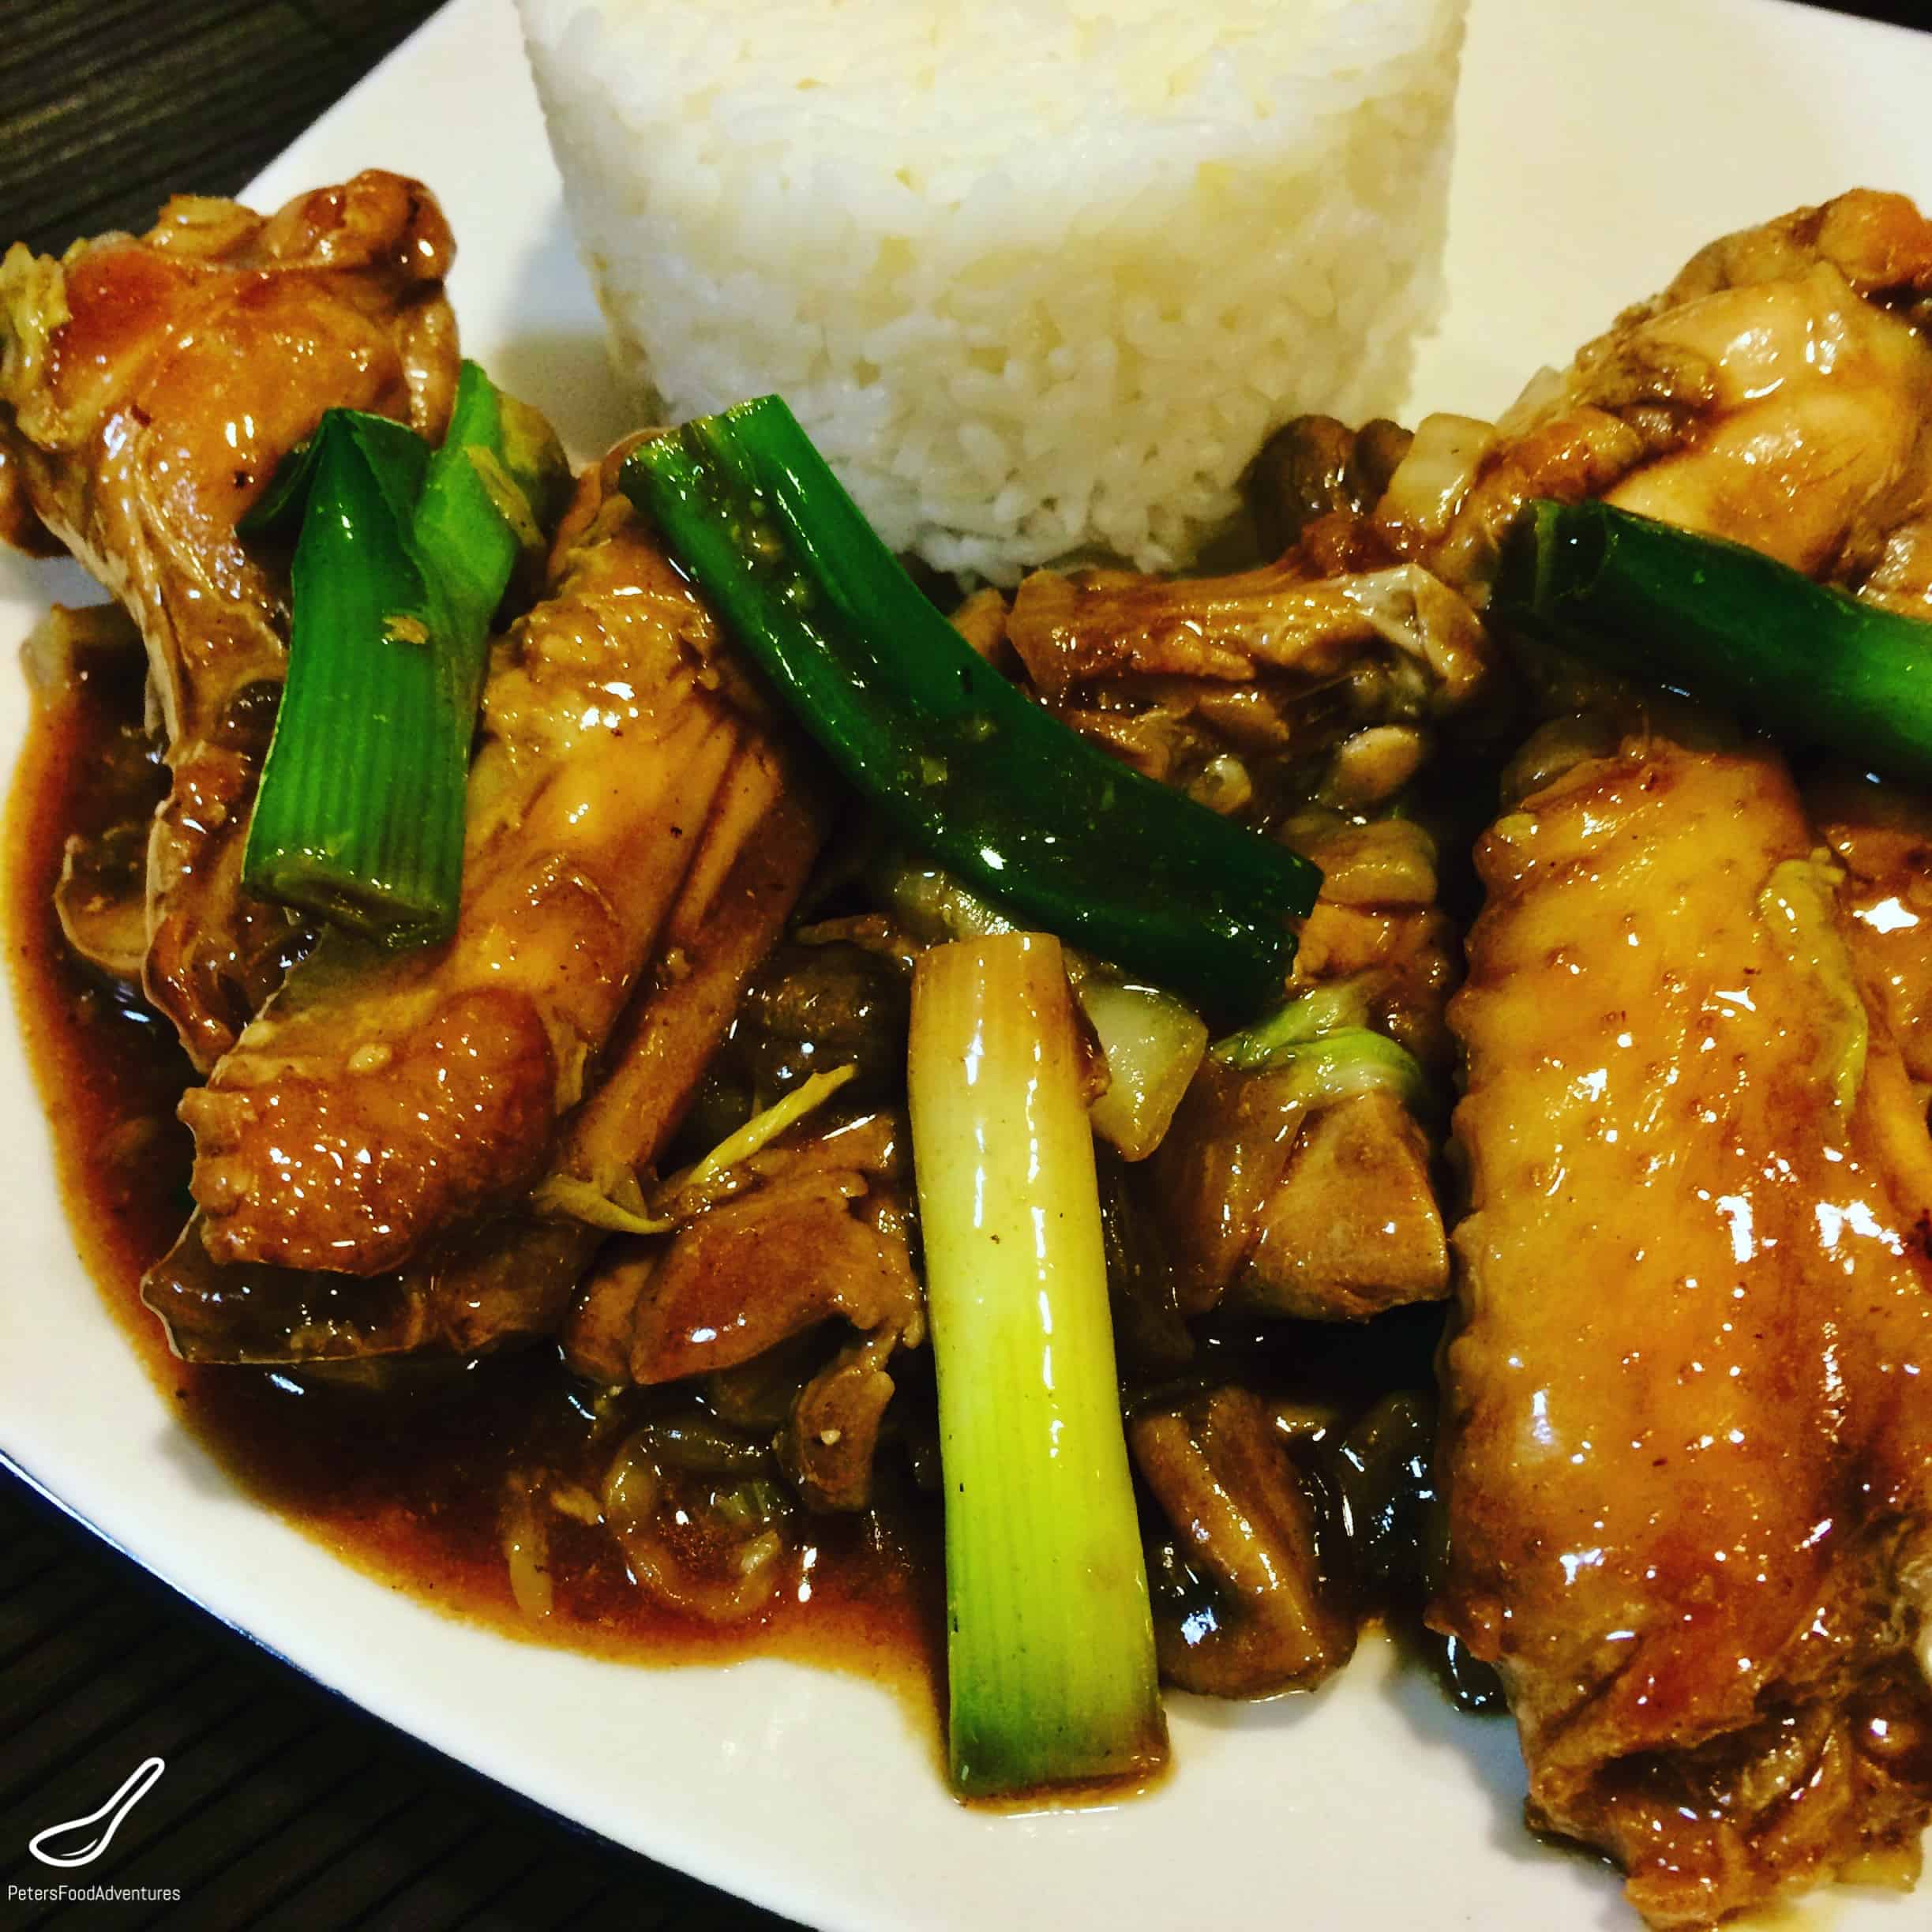 Easy Asian Stir Fry Served with Rice. Tasty Authentic Flavours with soy sauce shaoxing, garlic and green onions, Finger Licking Good! - Chinese Chicken Wing Stir Fry